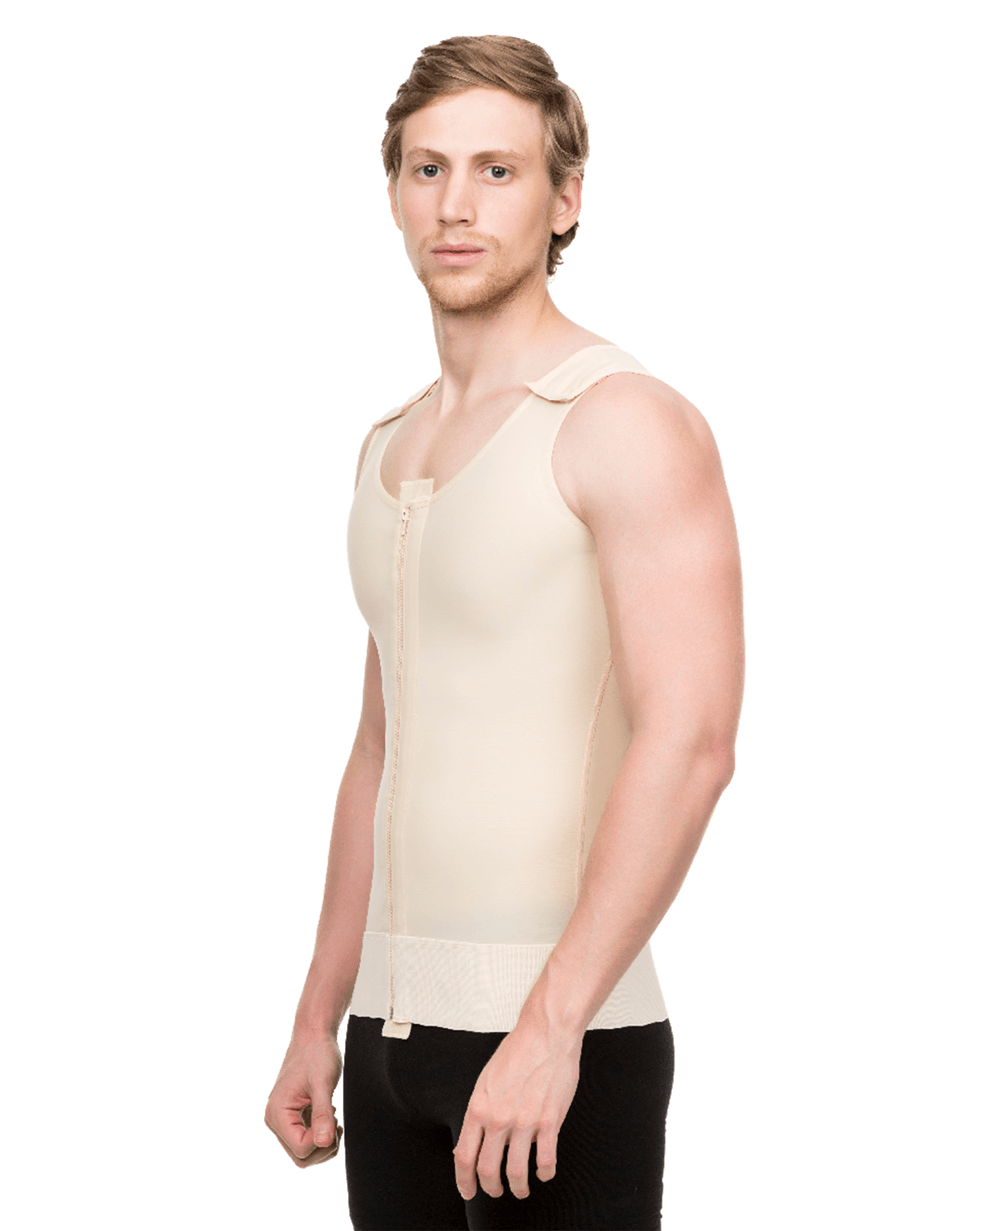 Male Abdominal Cosmetic Surgery Compression Vest with Zipper (MG03) - Isavela Compression Garments